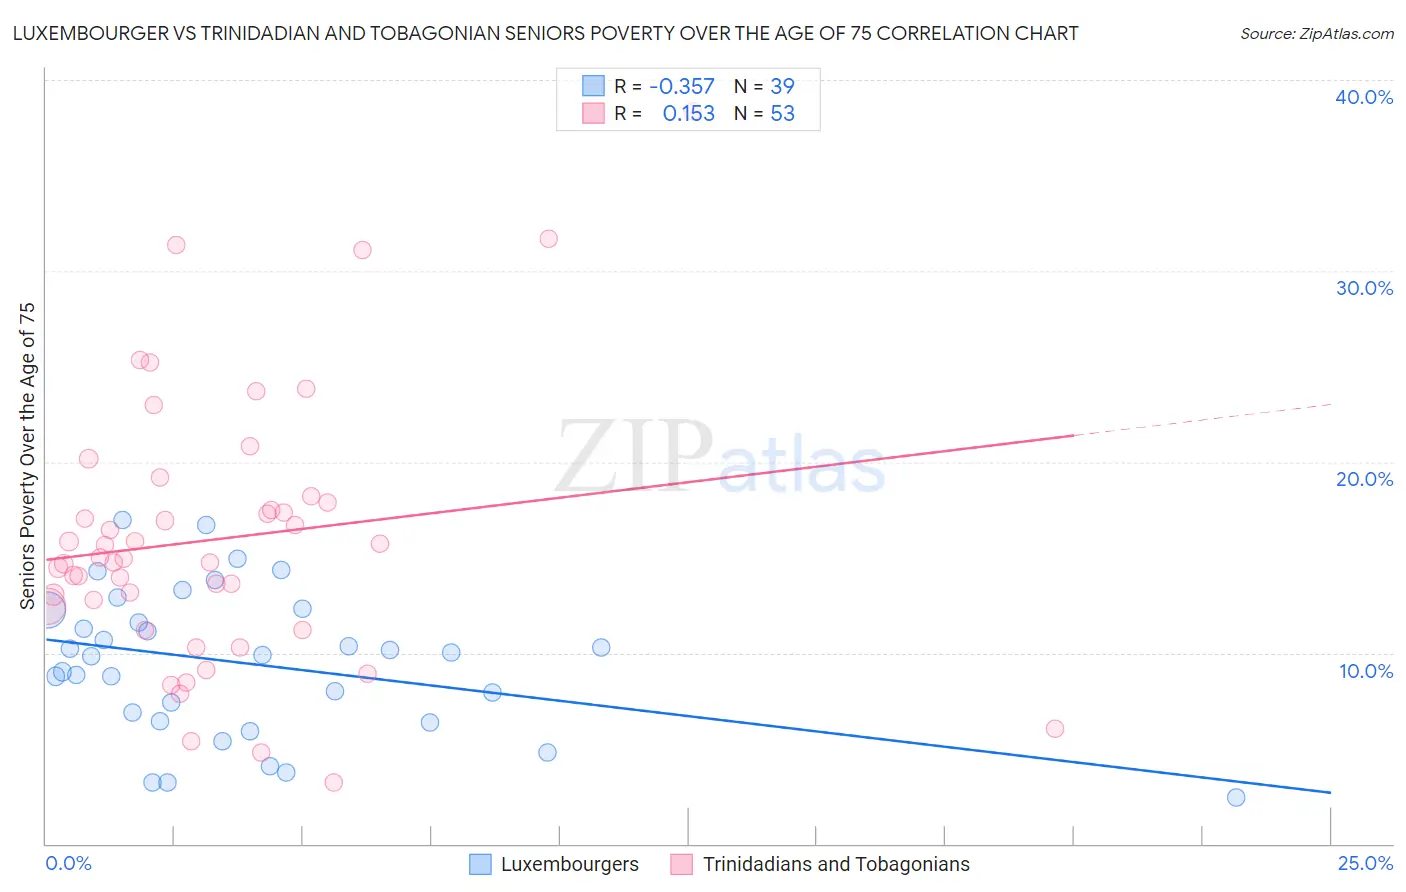 Luxembourger vs Trinidadian and Tobagonian Seniors Poverty Over the Age of 75